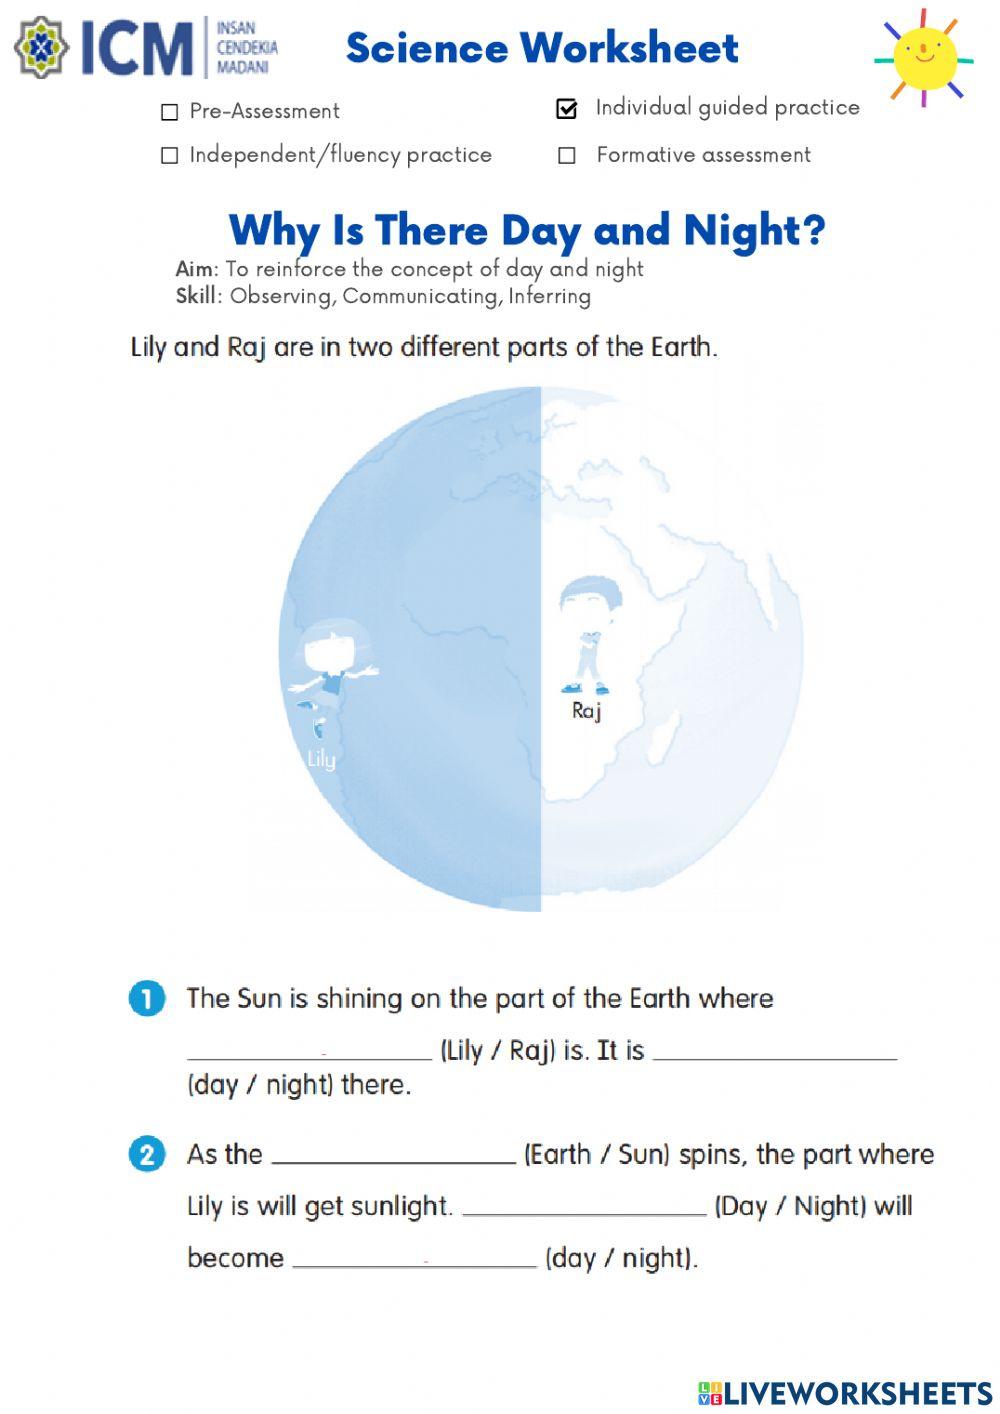 Why Is There Day and Night?